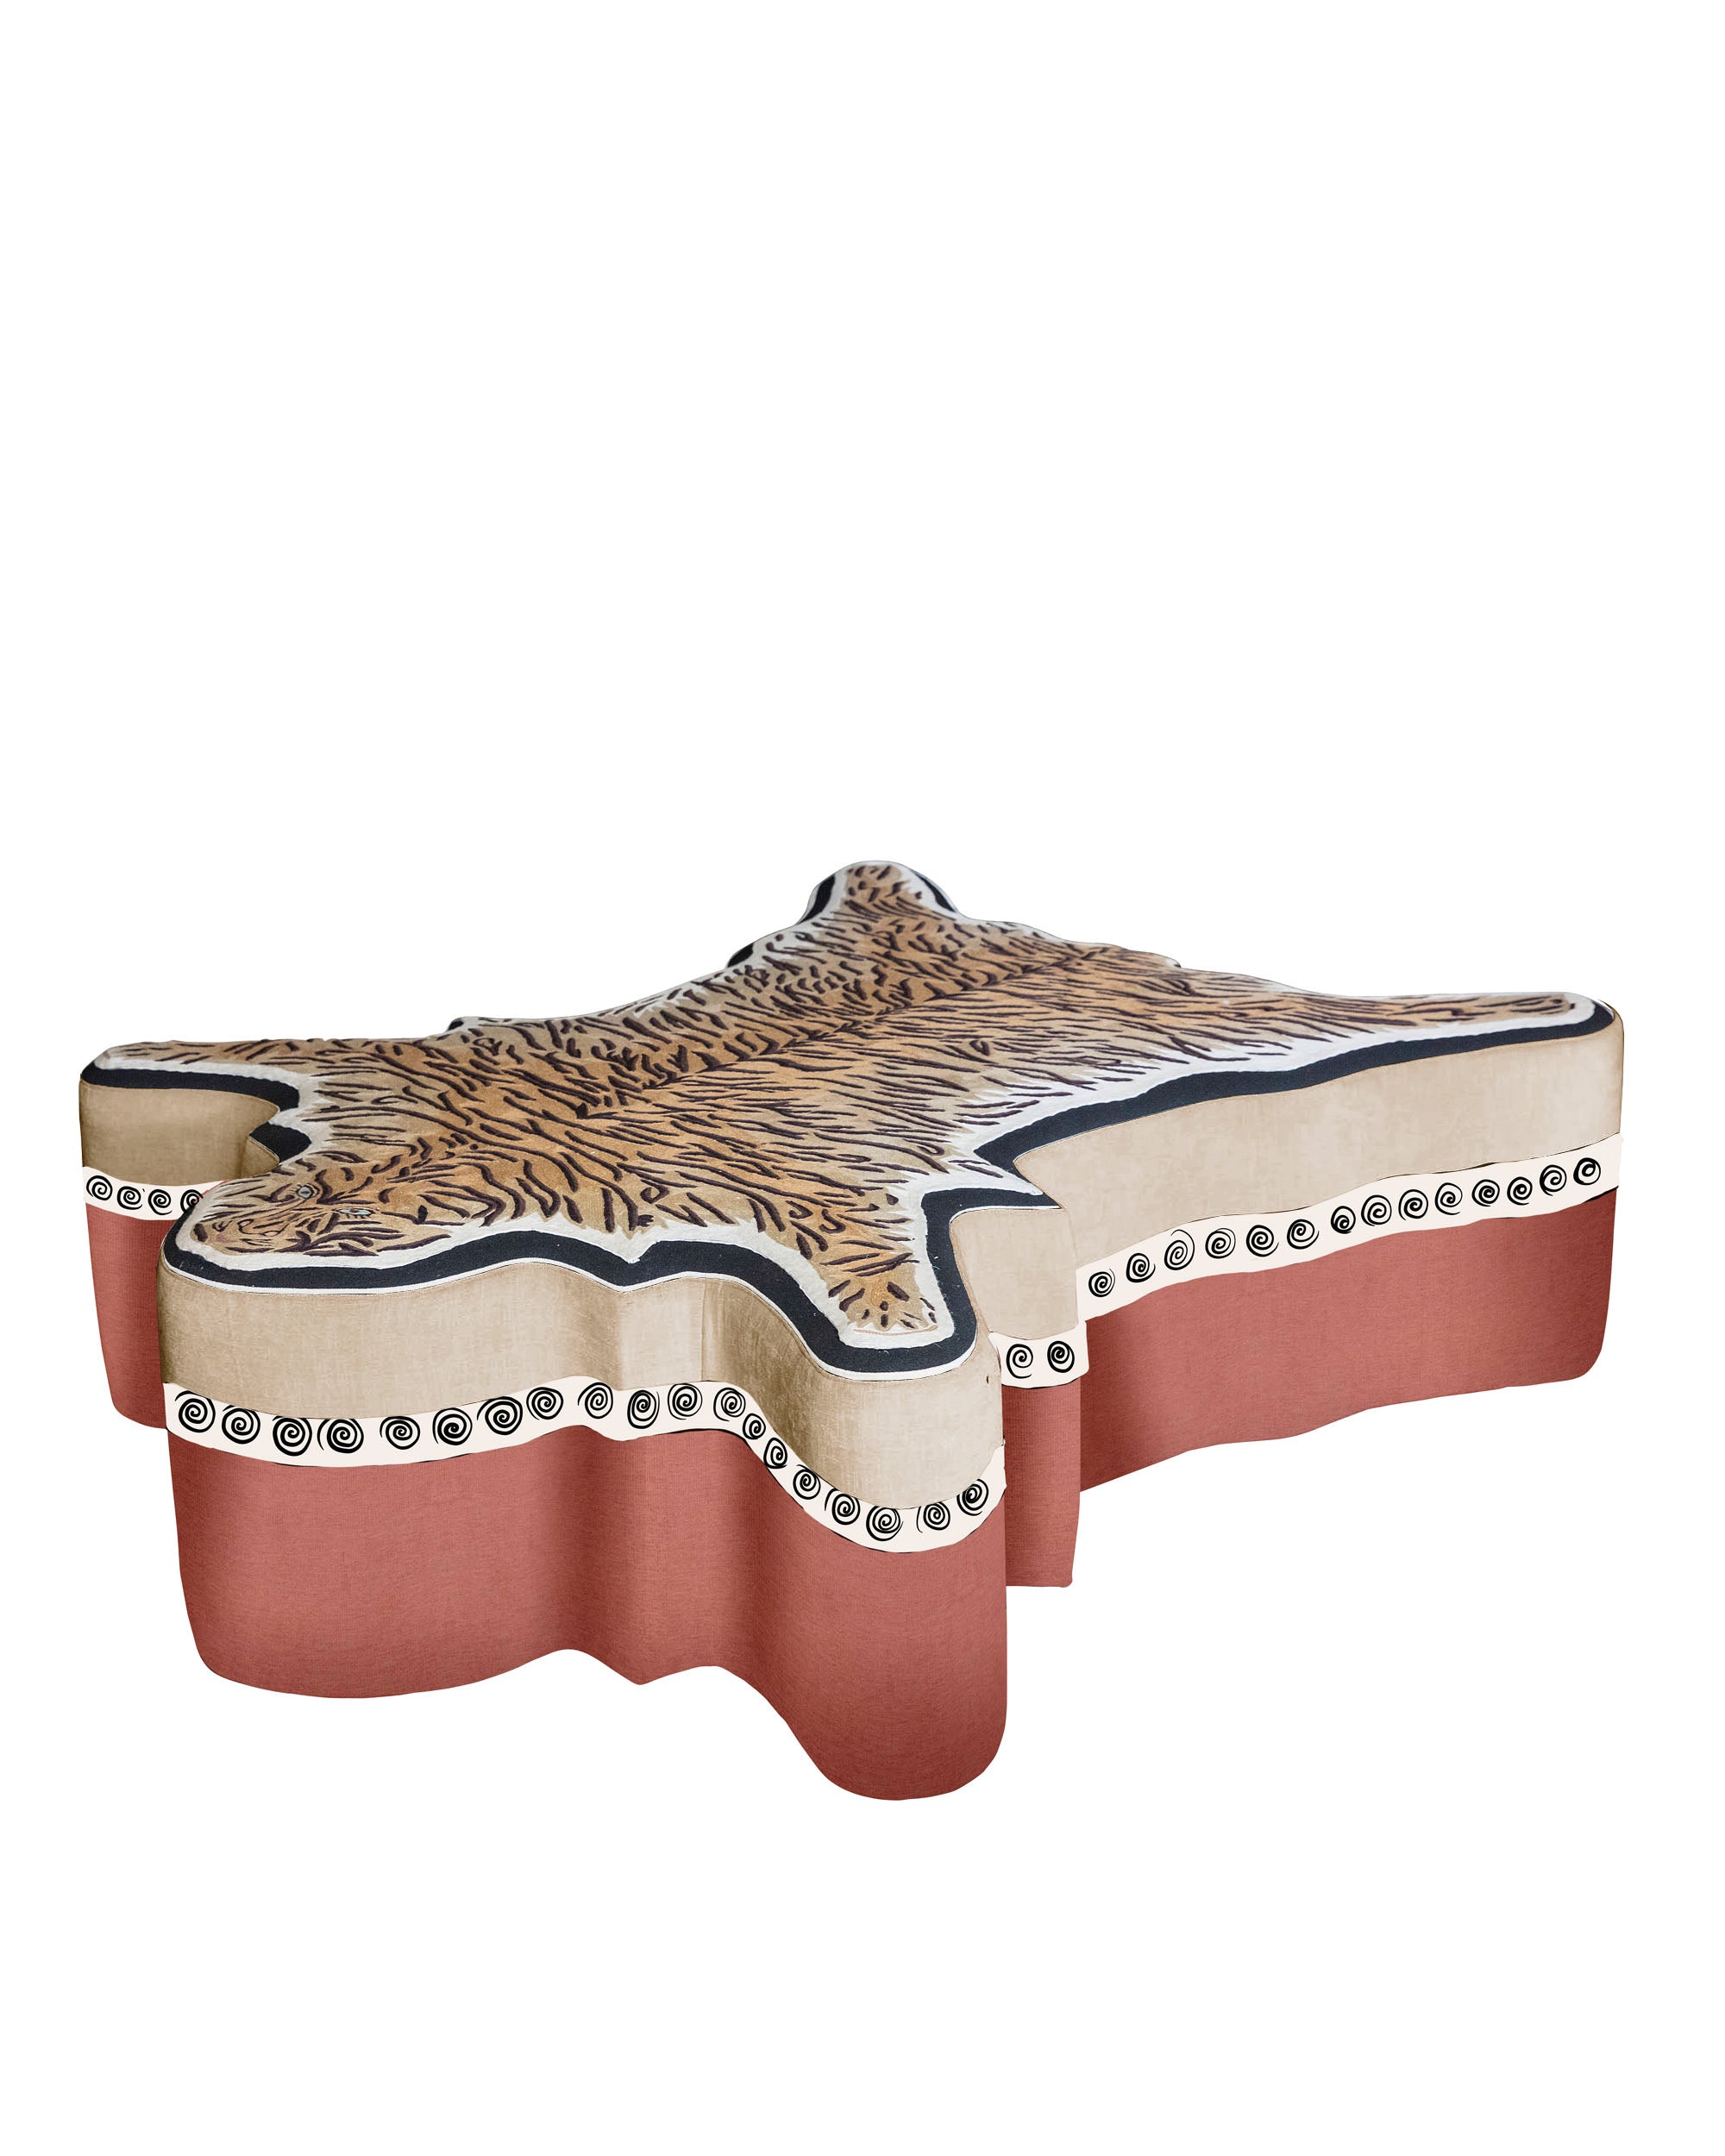  Upholstered ottoman with a tiger’s pelt embroidered in wool 100% (Marsala)